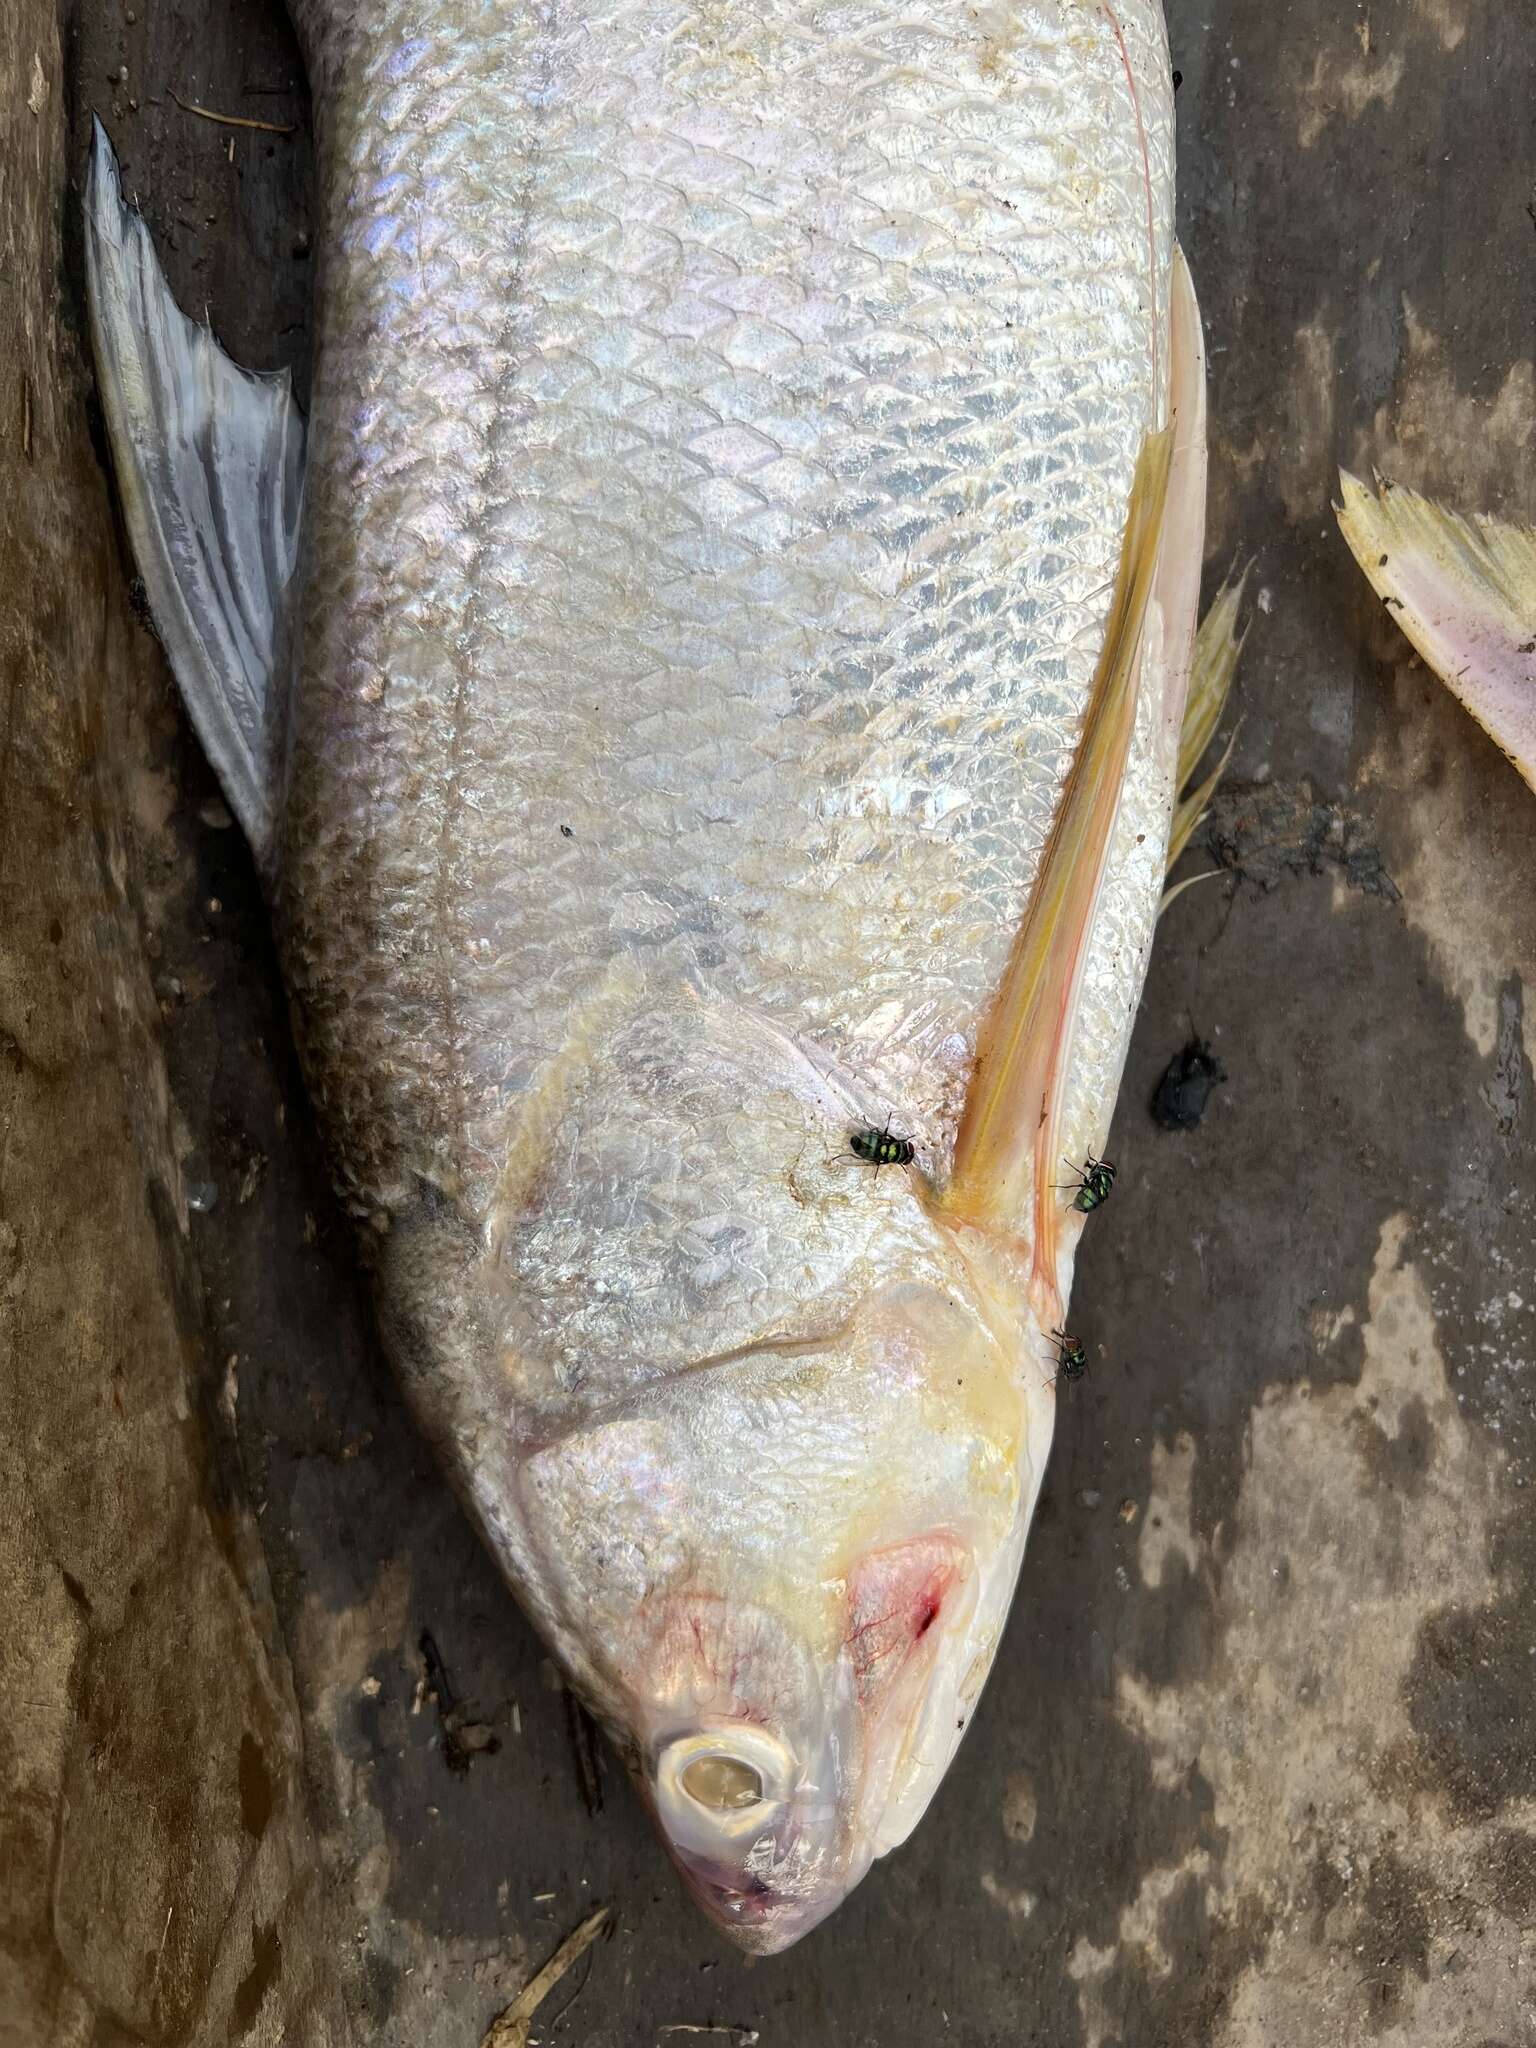 Image of Giant African threadfin